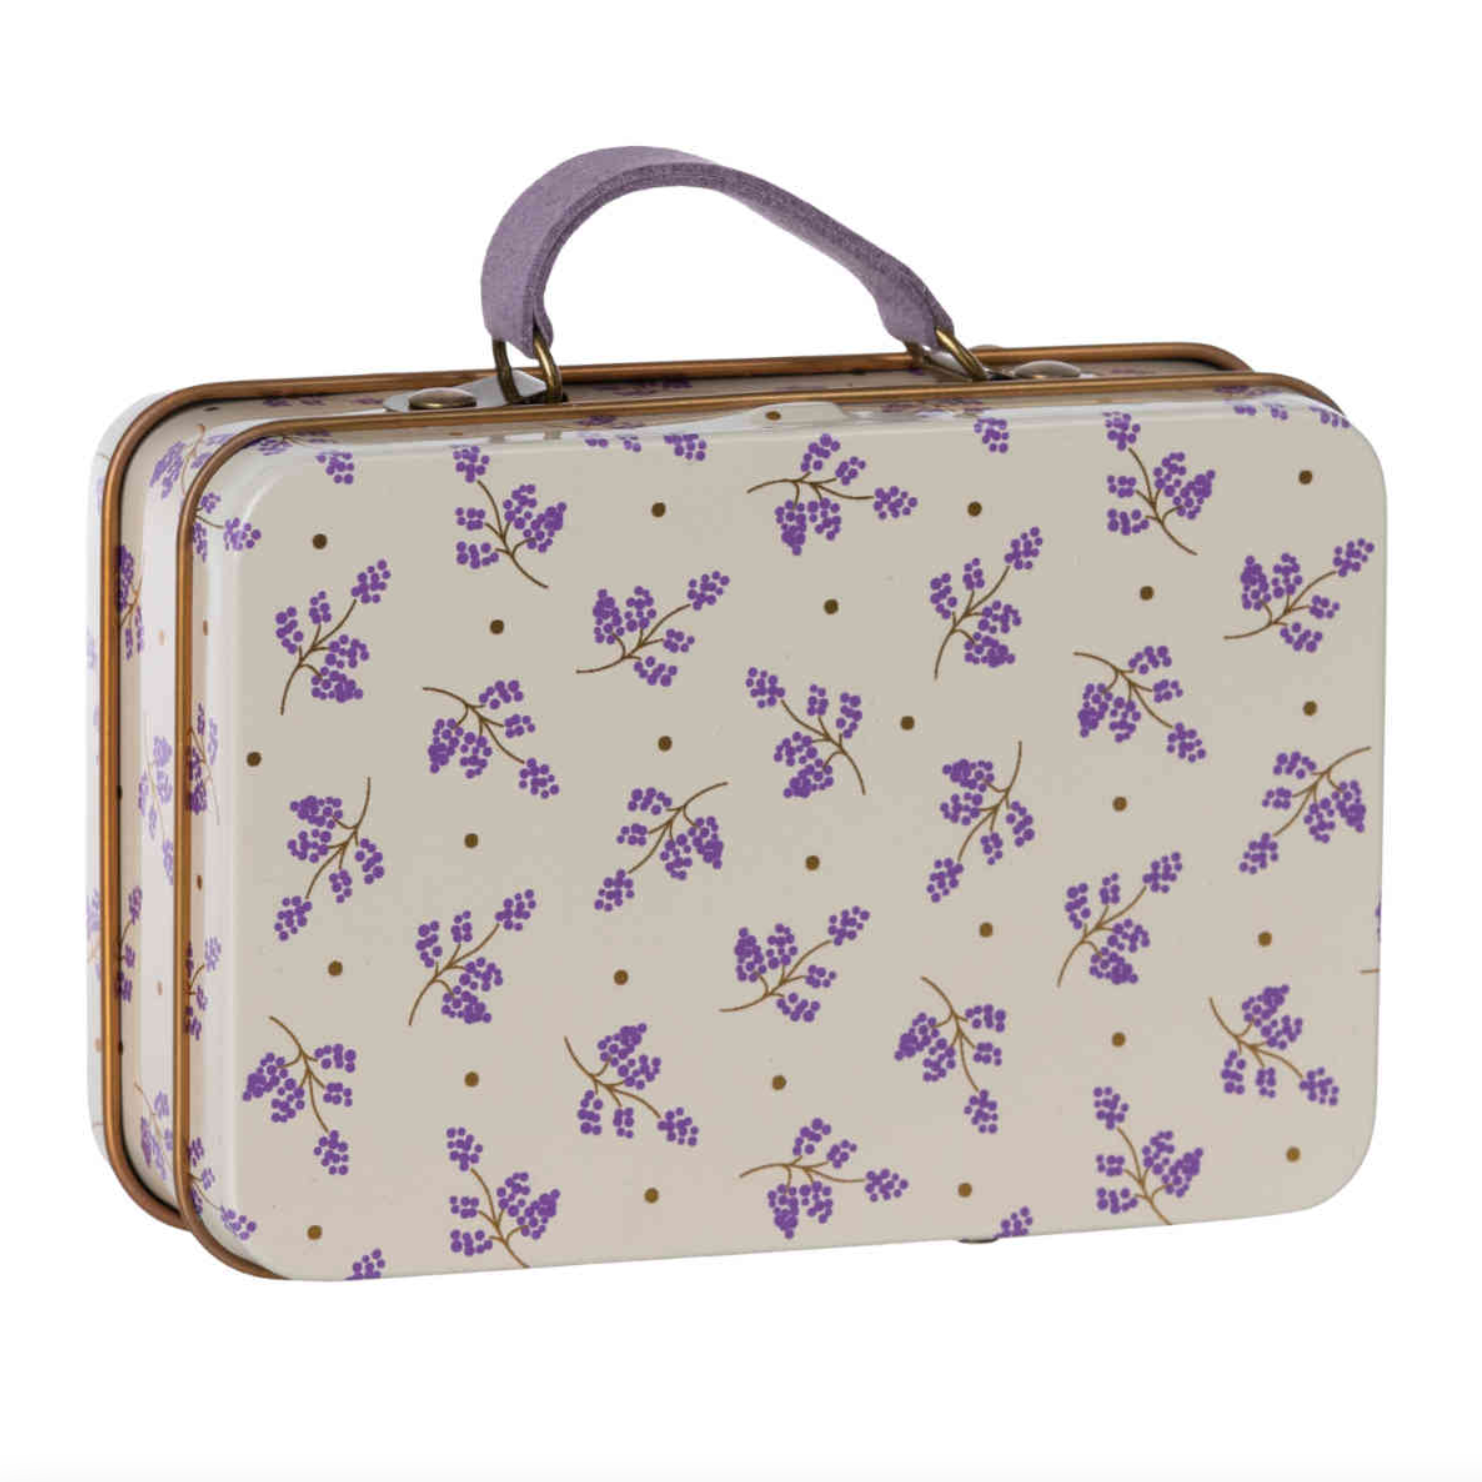 MAILEG SMALL SUITCASE